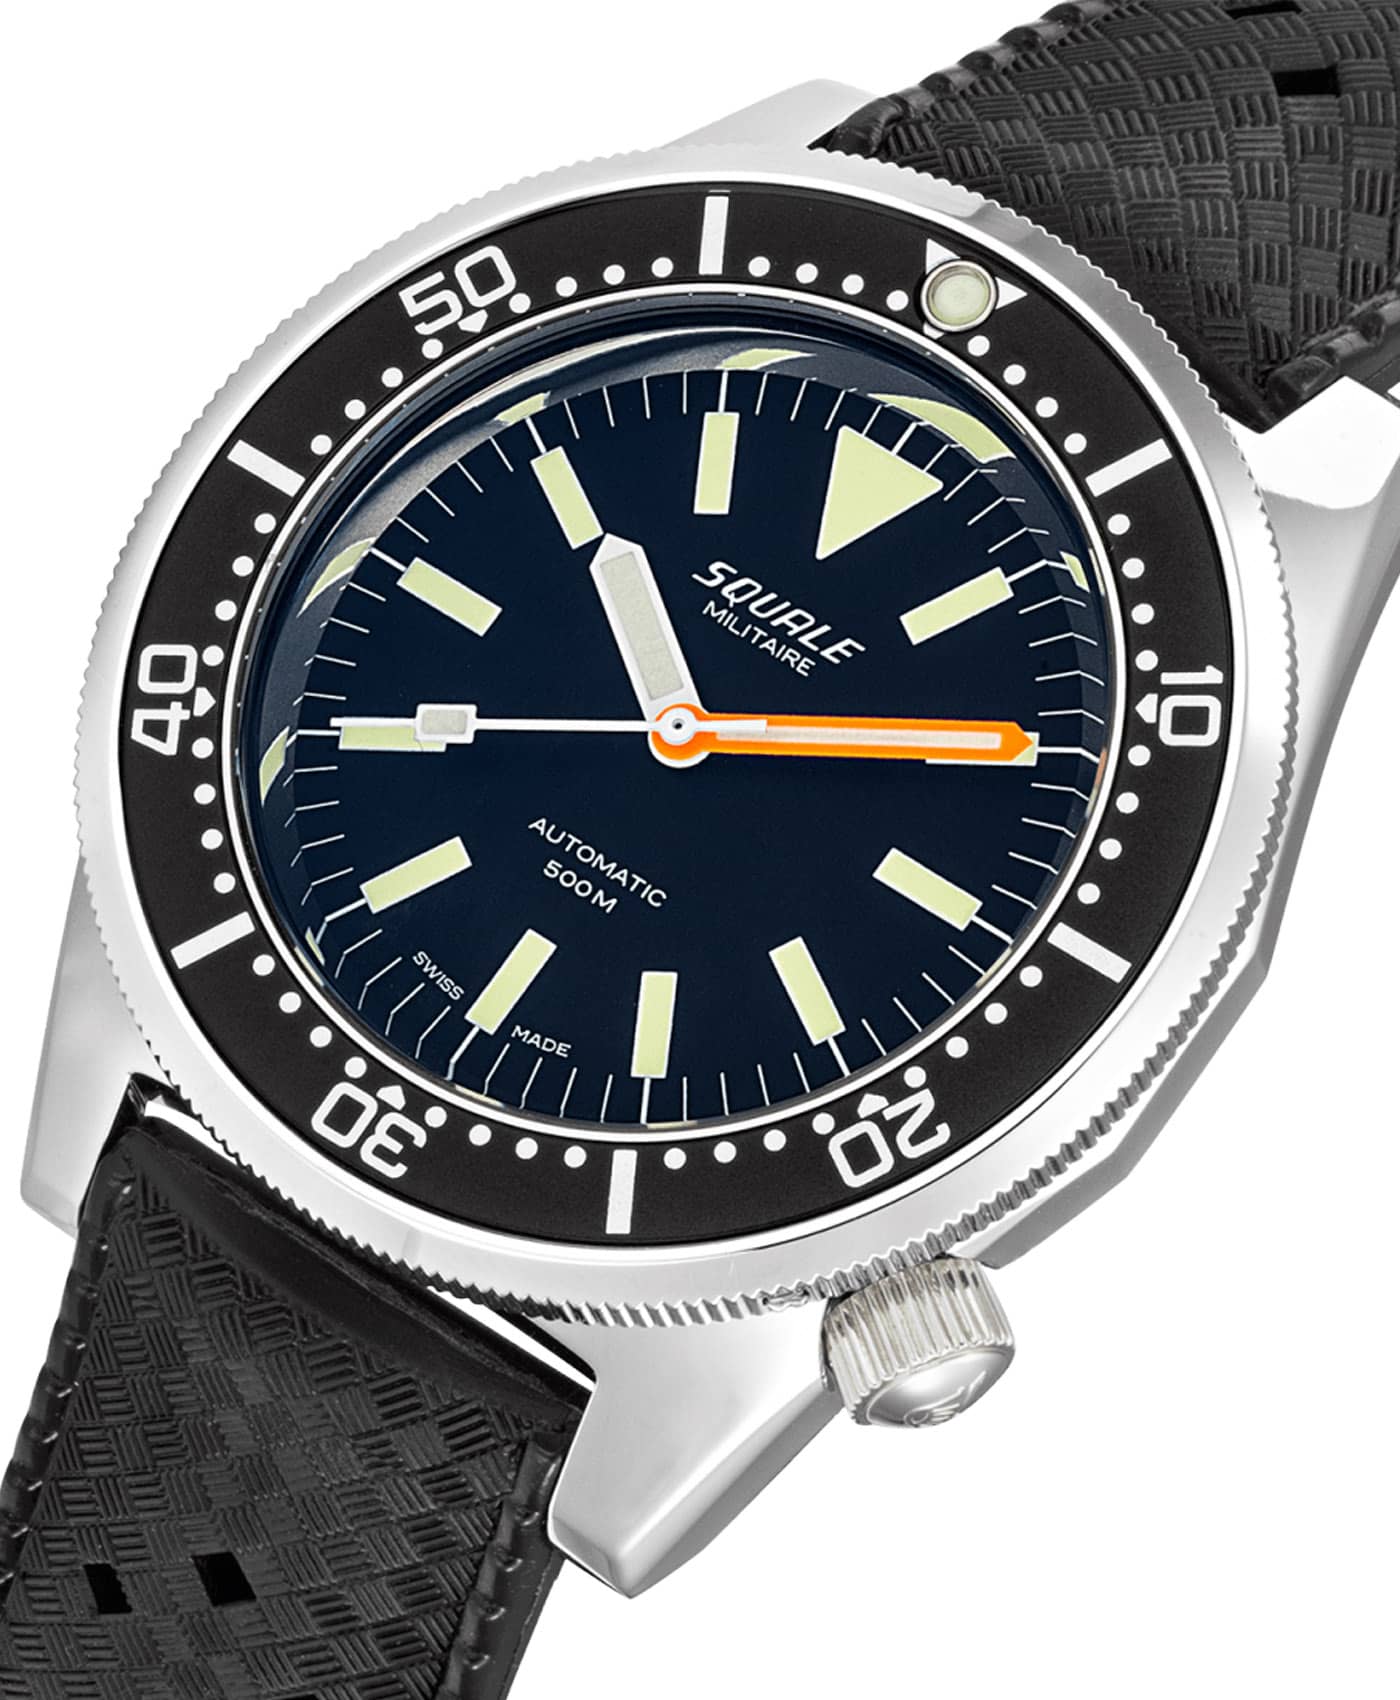 Squale 1521-026-A Militaire Polished_close up